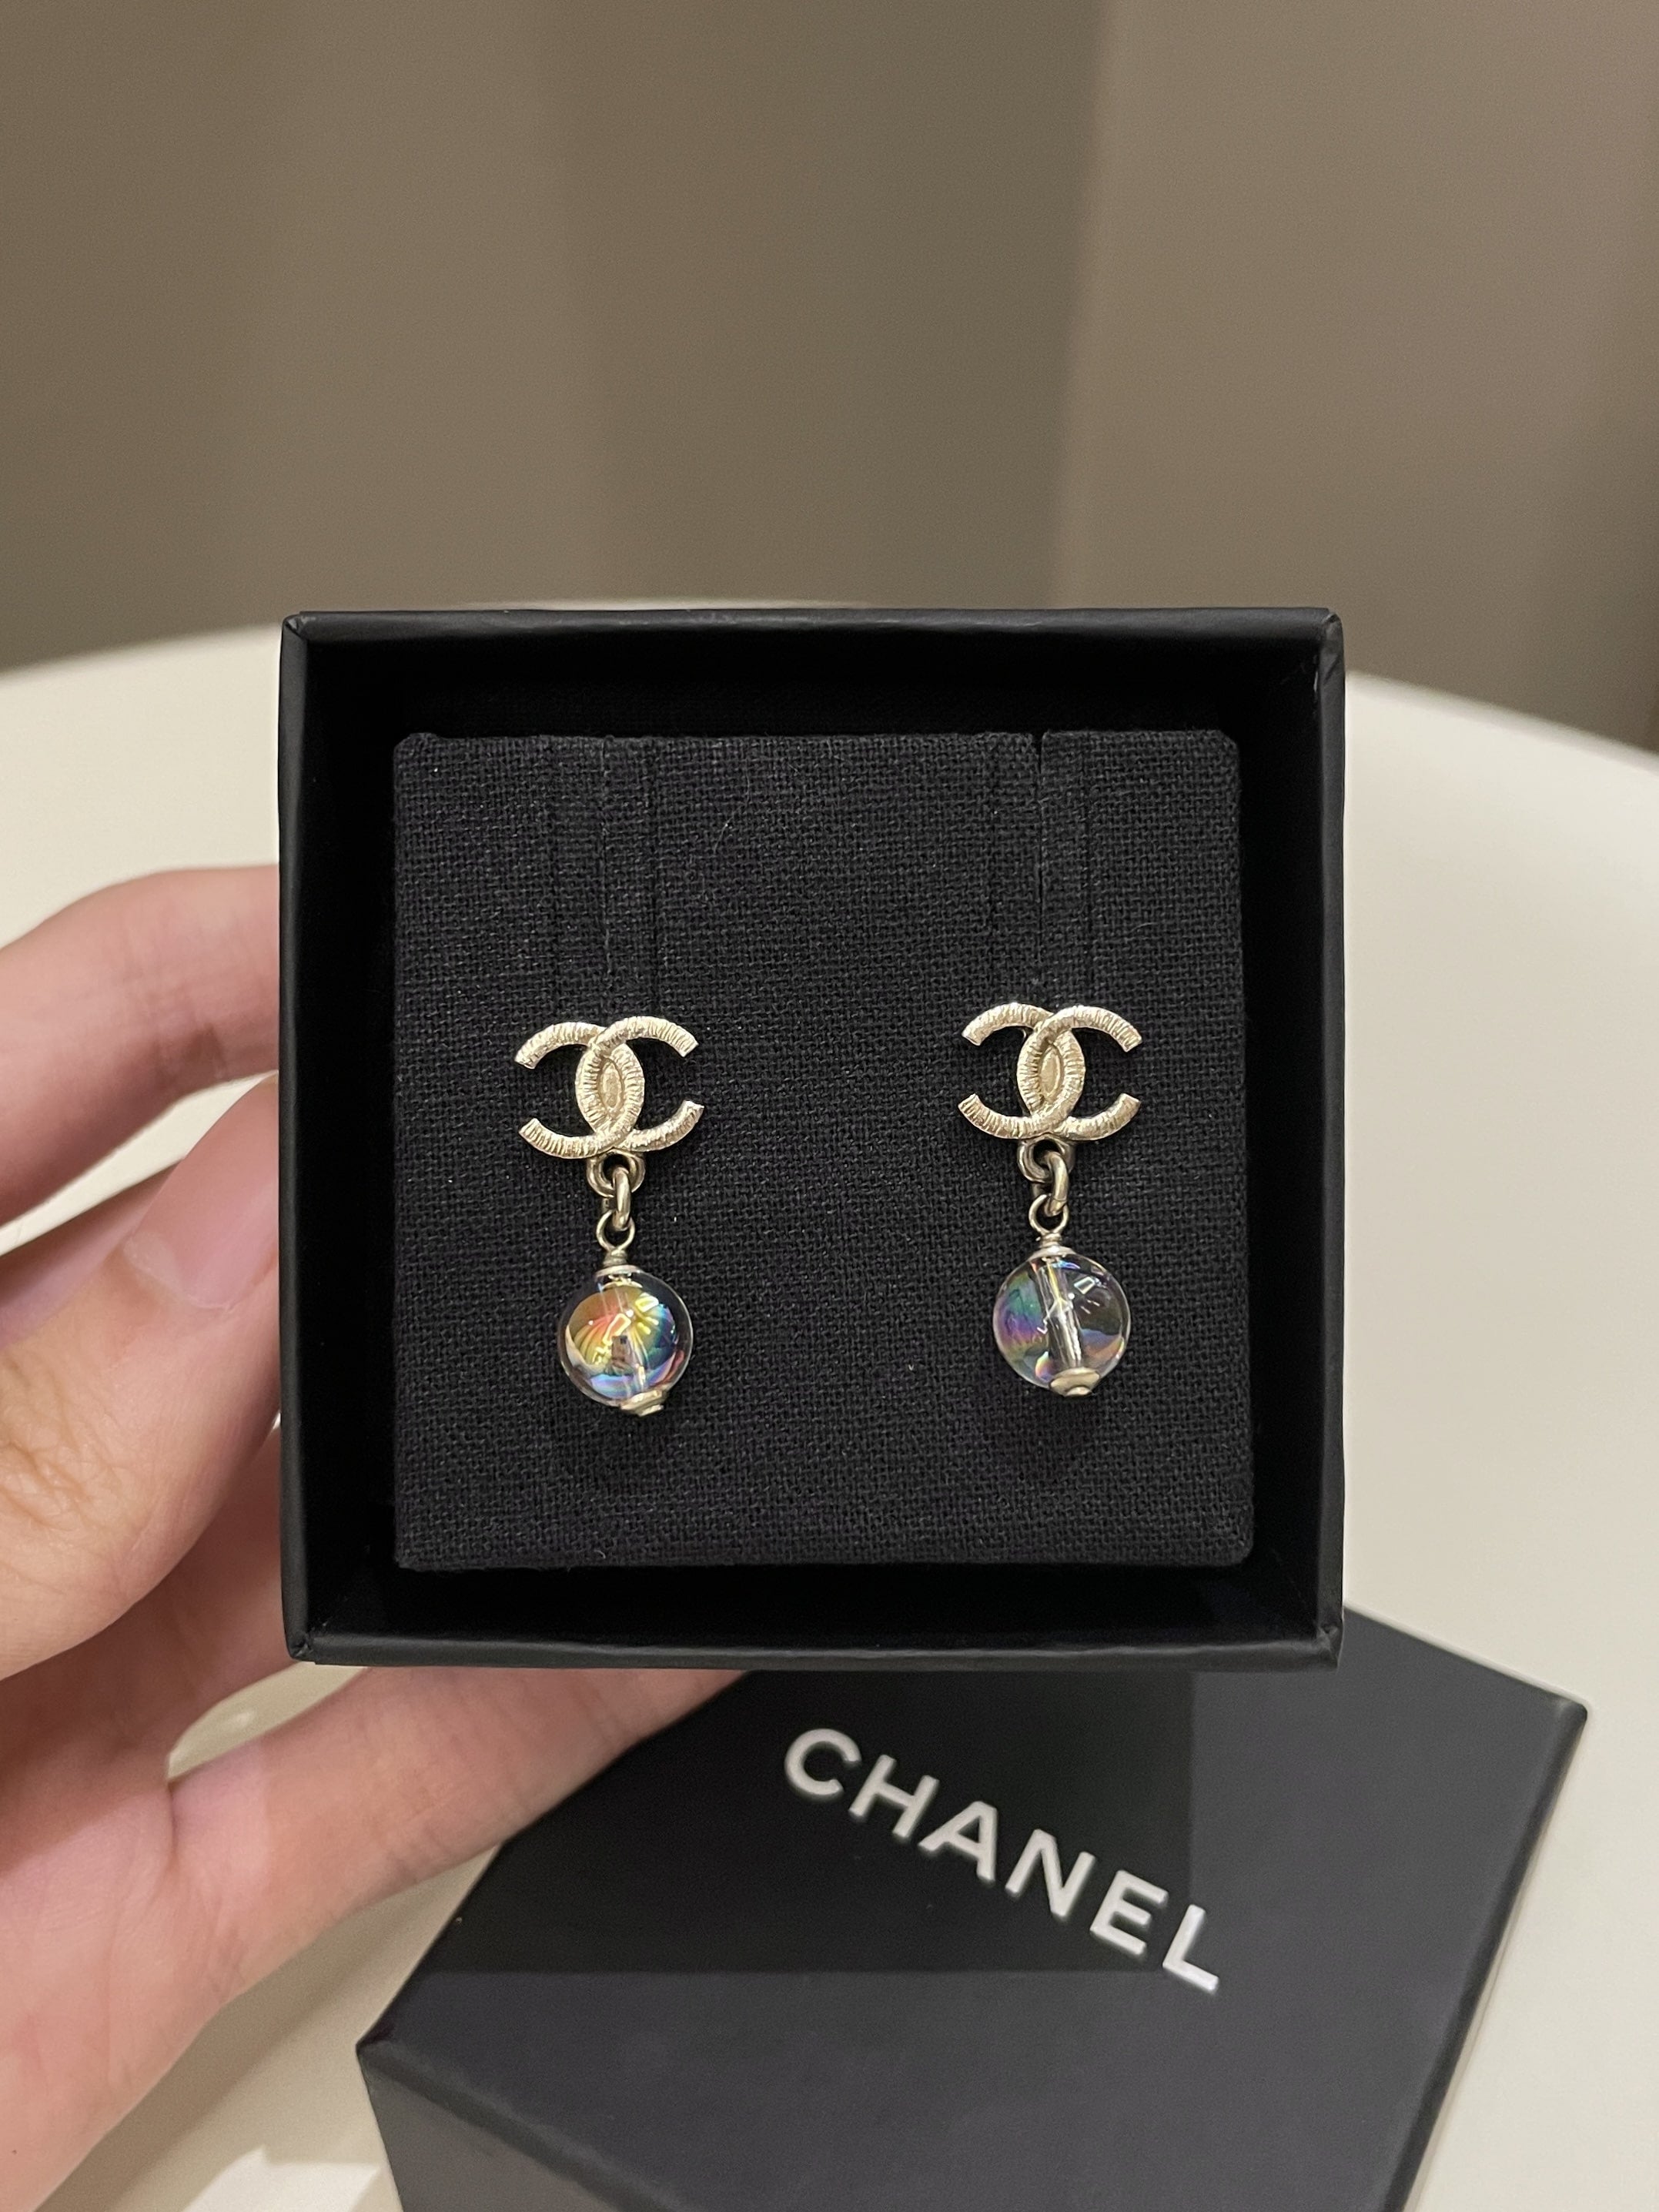 Chanel 18S CC Dangling Crystal Earring
Iridescent